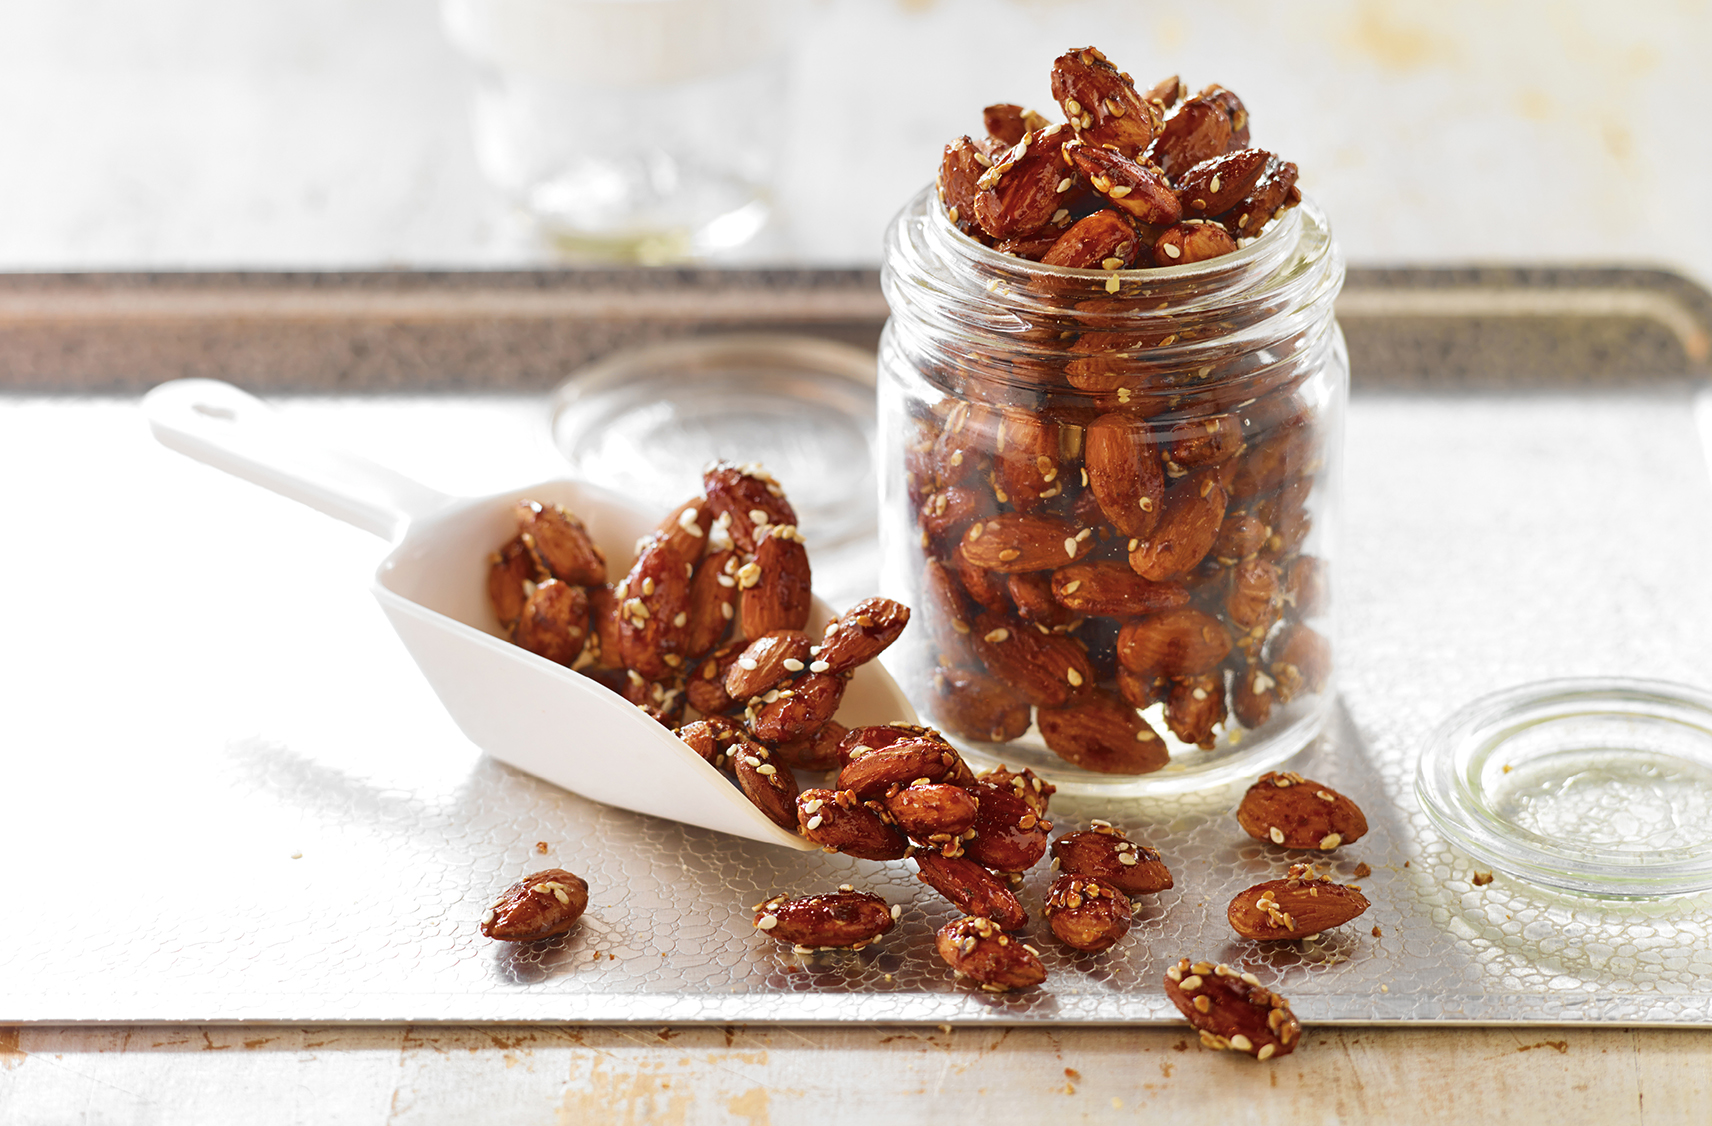 Jar & scoop overflowing with almonds coated in honey & spices